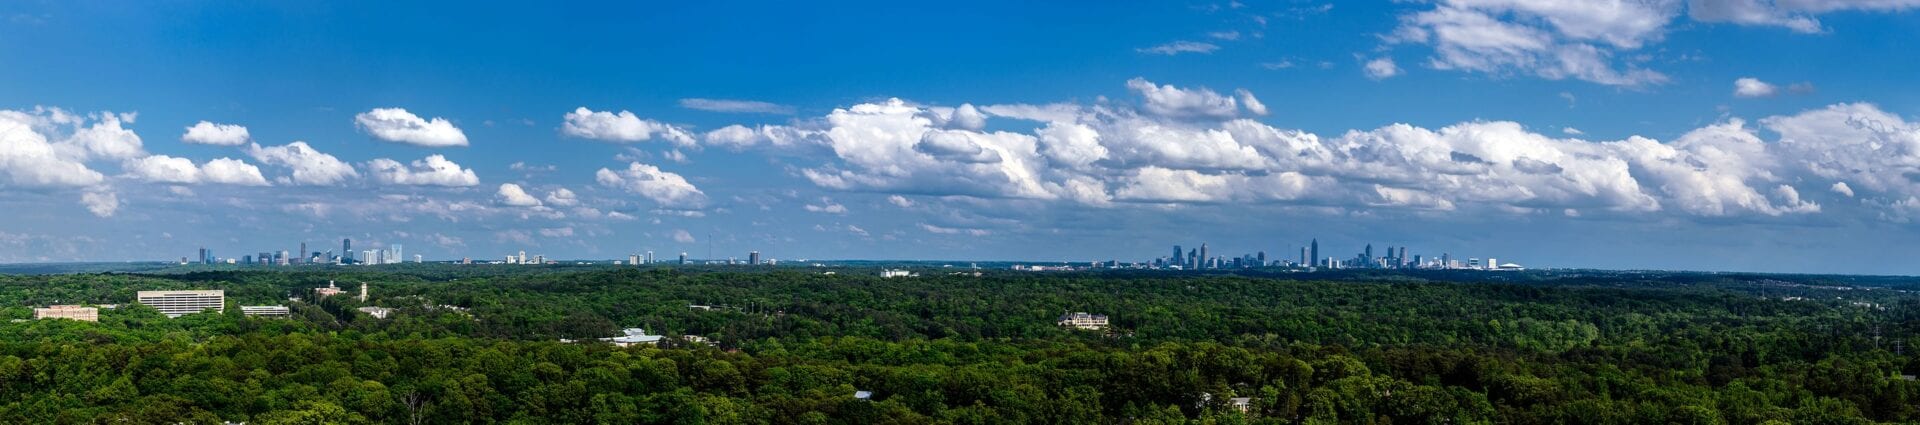 The City of Atlanta has a lush green canopy when viewed from above.